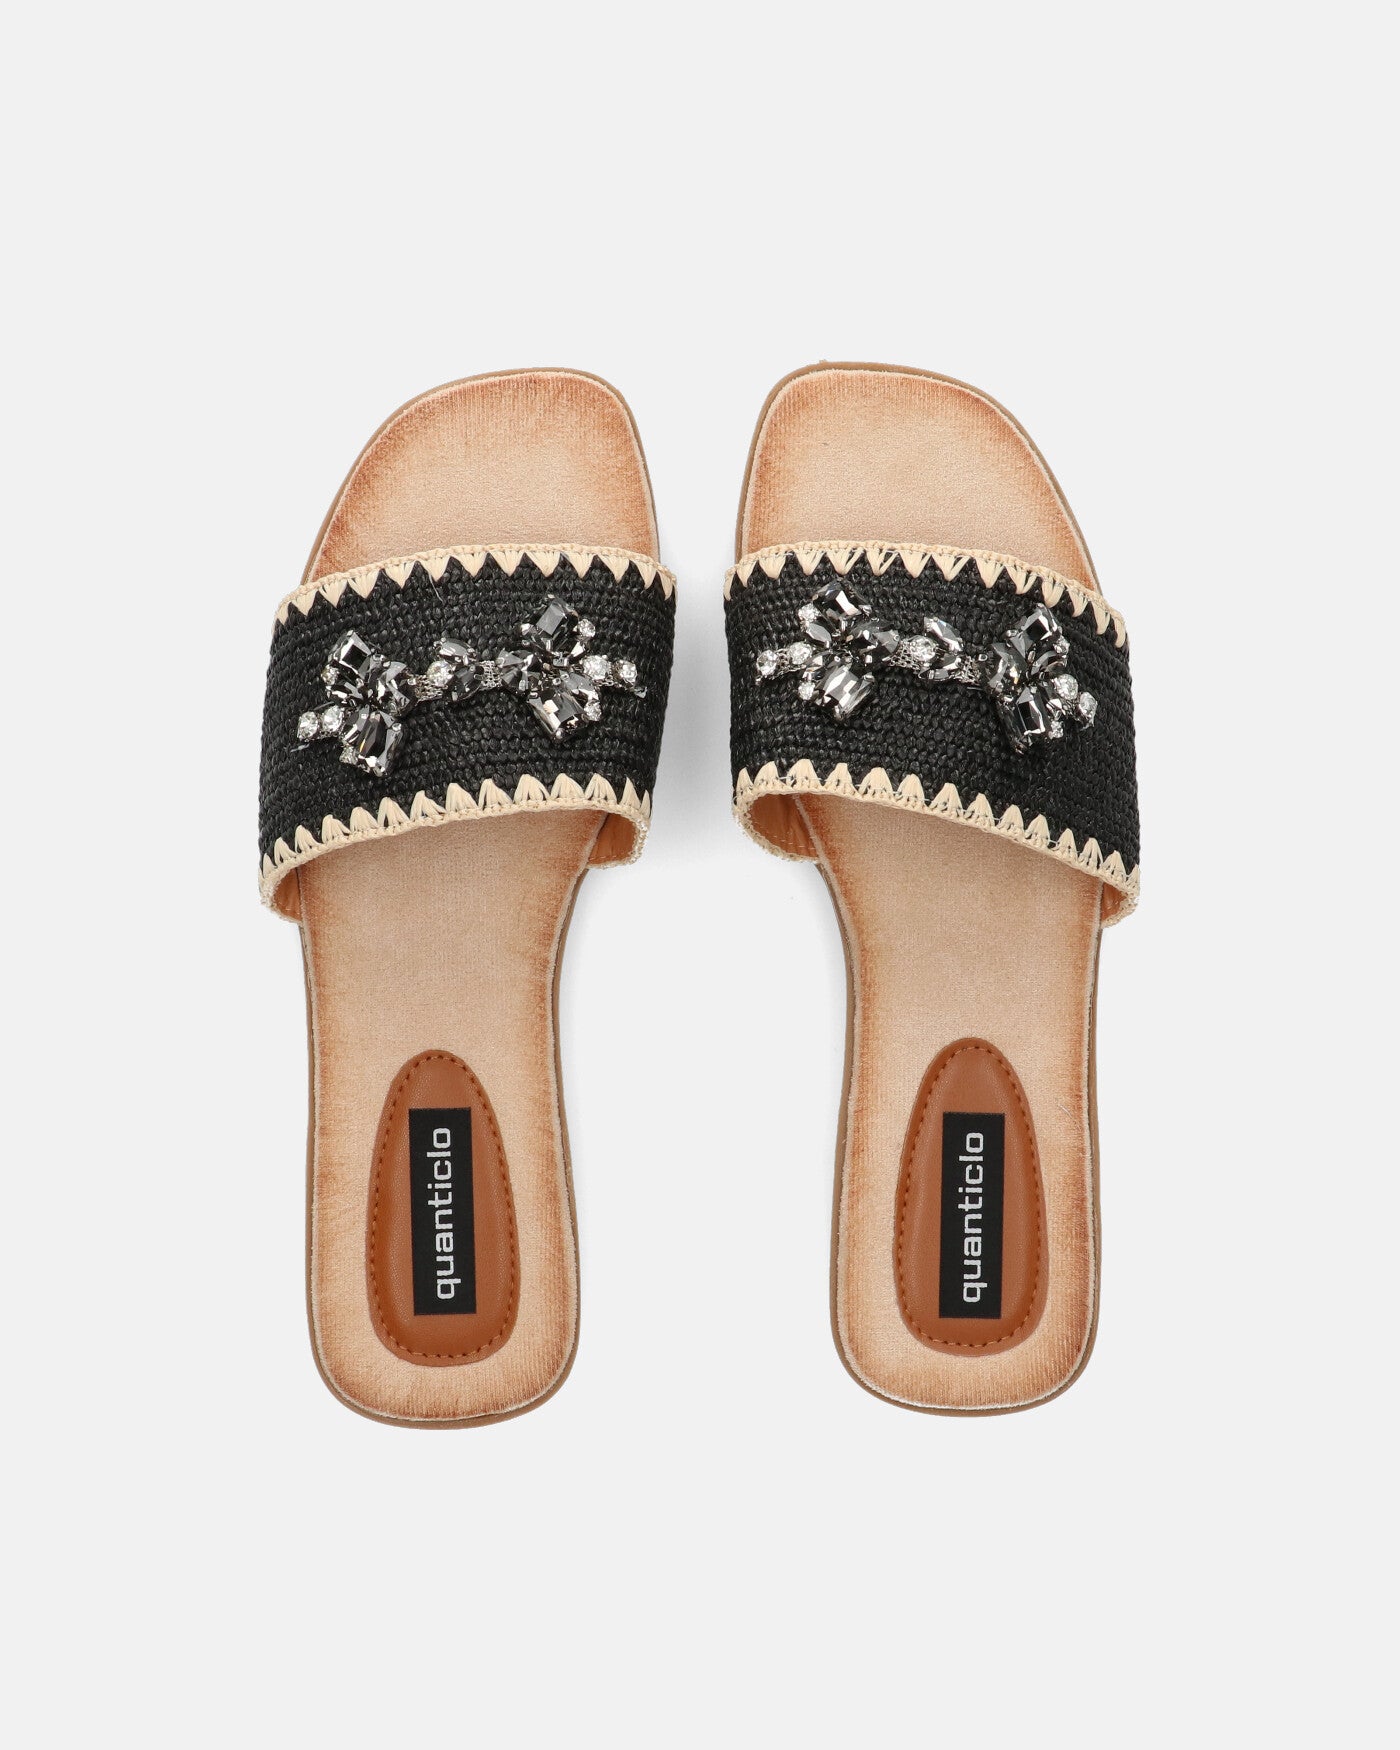 ROZENN - beige slippers with embroidered black band and gems